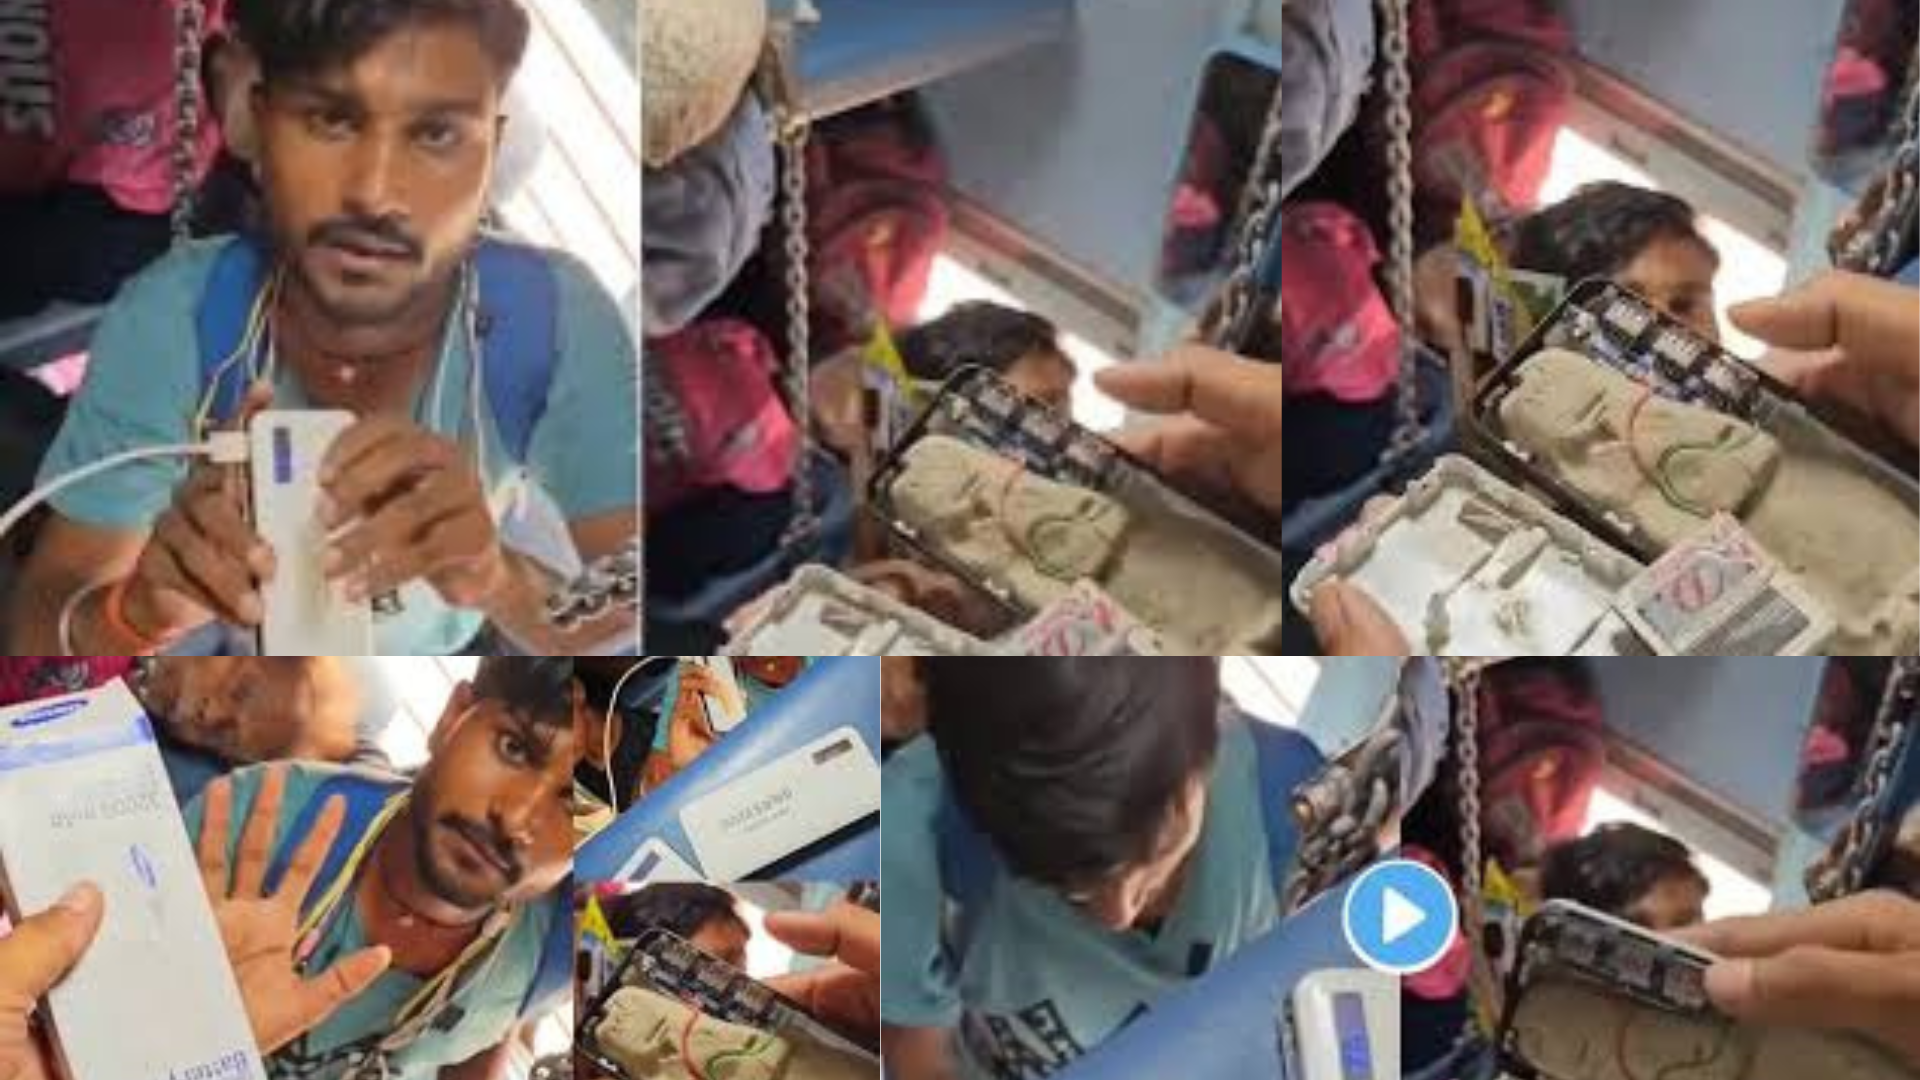 Vendor Selling Mud-Filled ‘Power Banks’ On Train Exposed: Viral Video